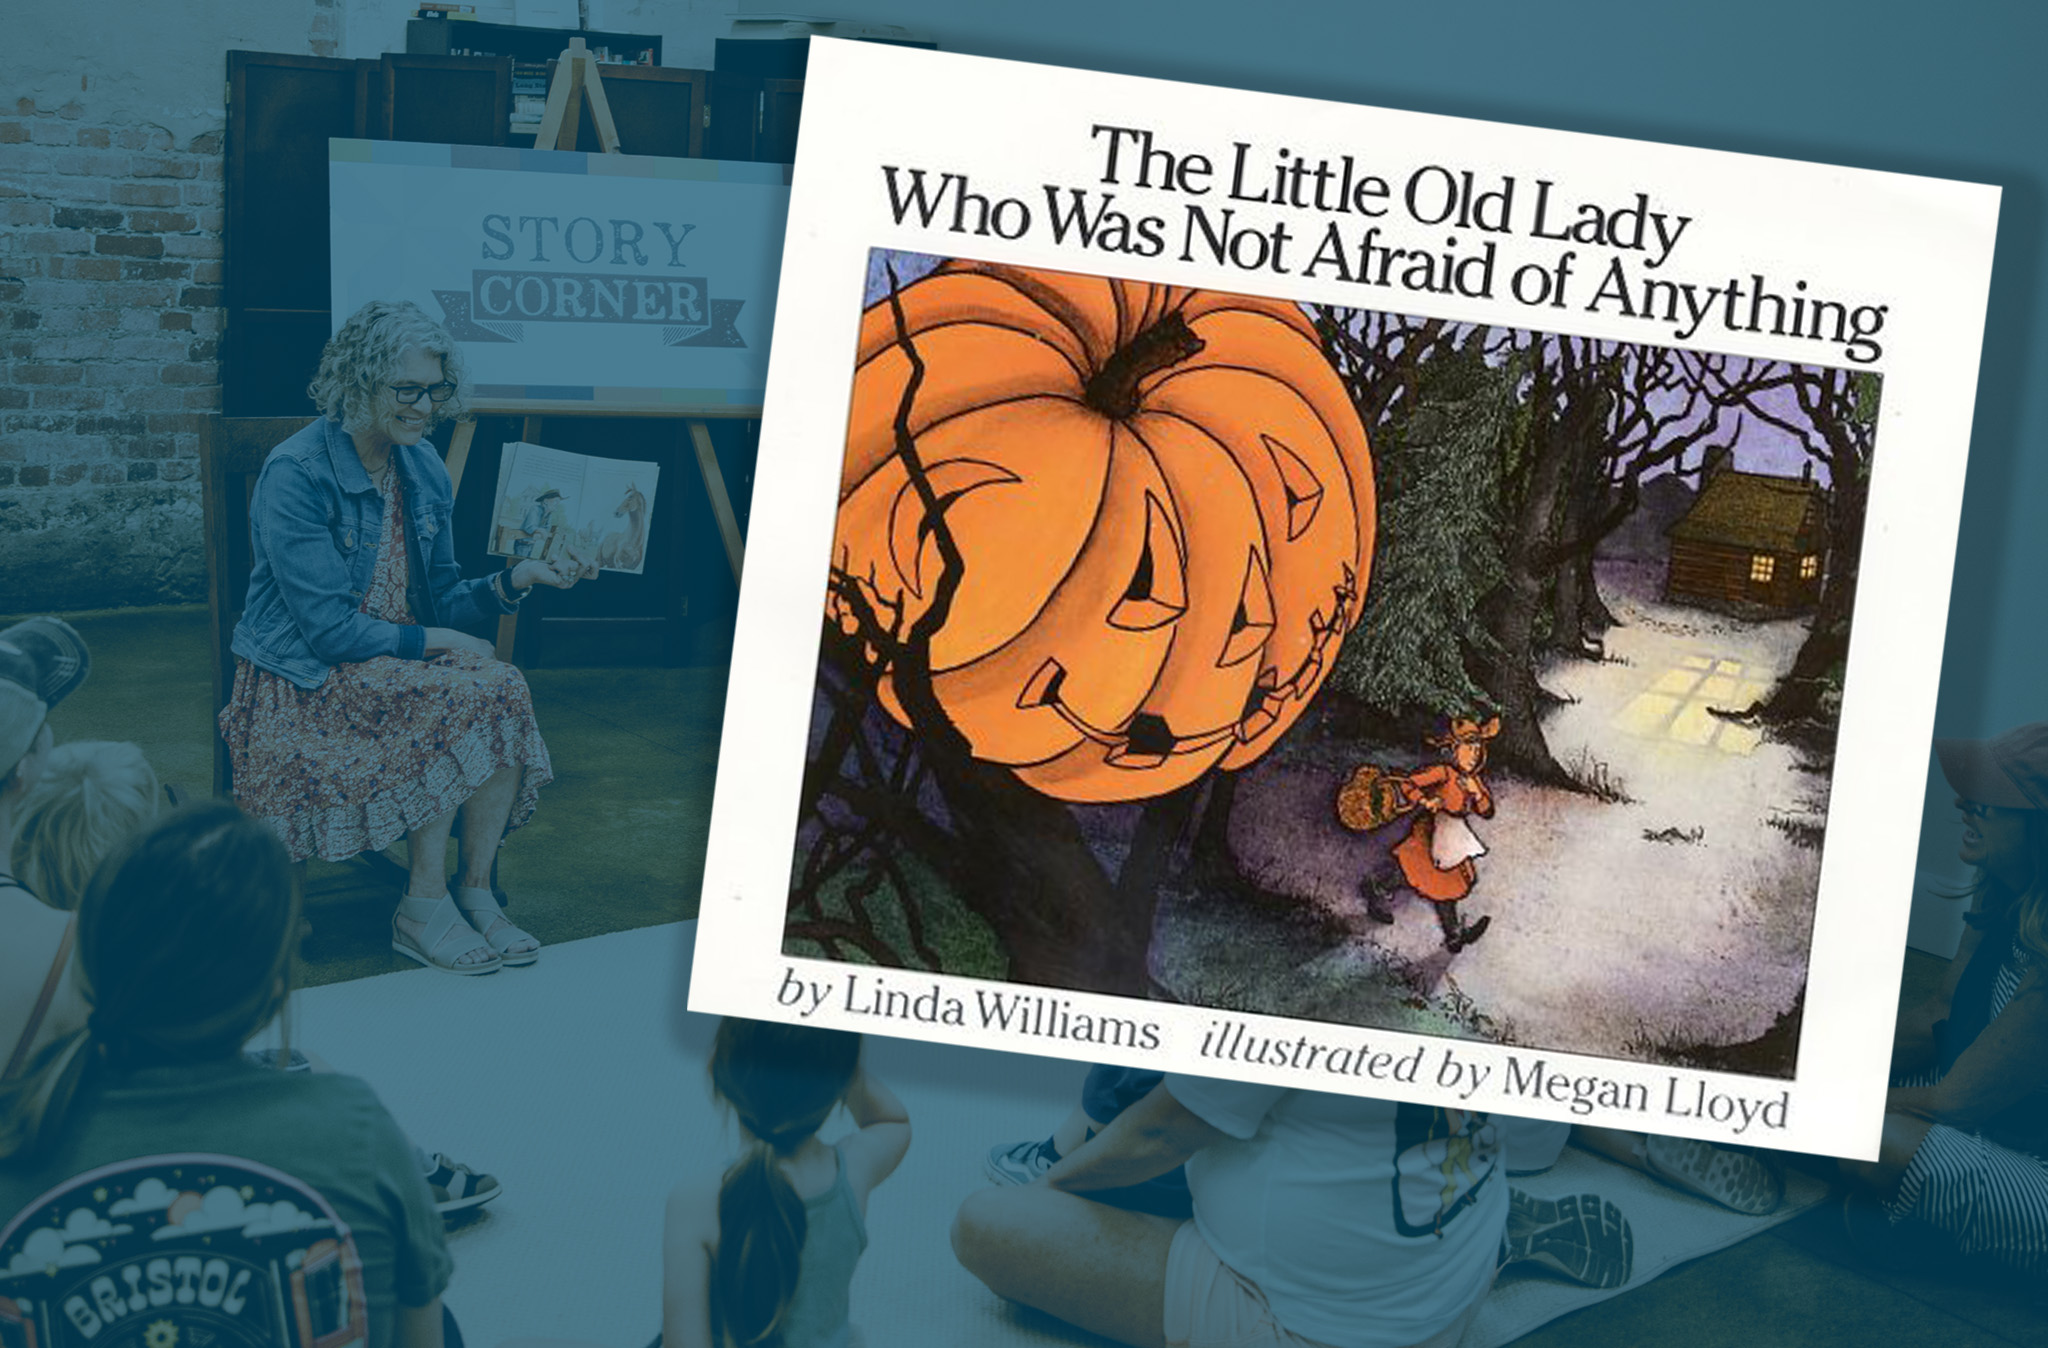 A graphic depicting the cover of the book "The Little Old Lady Who Was Not Afraid of Anything: A Halloween Book for Kids."